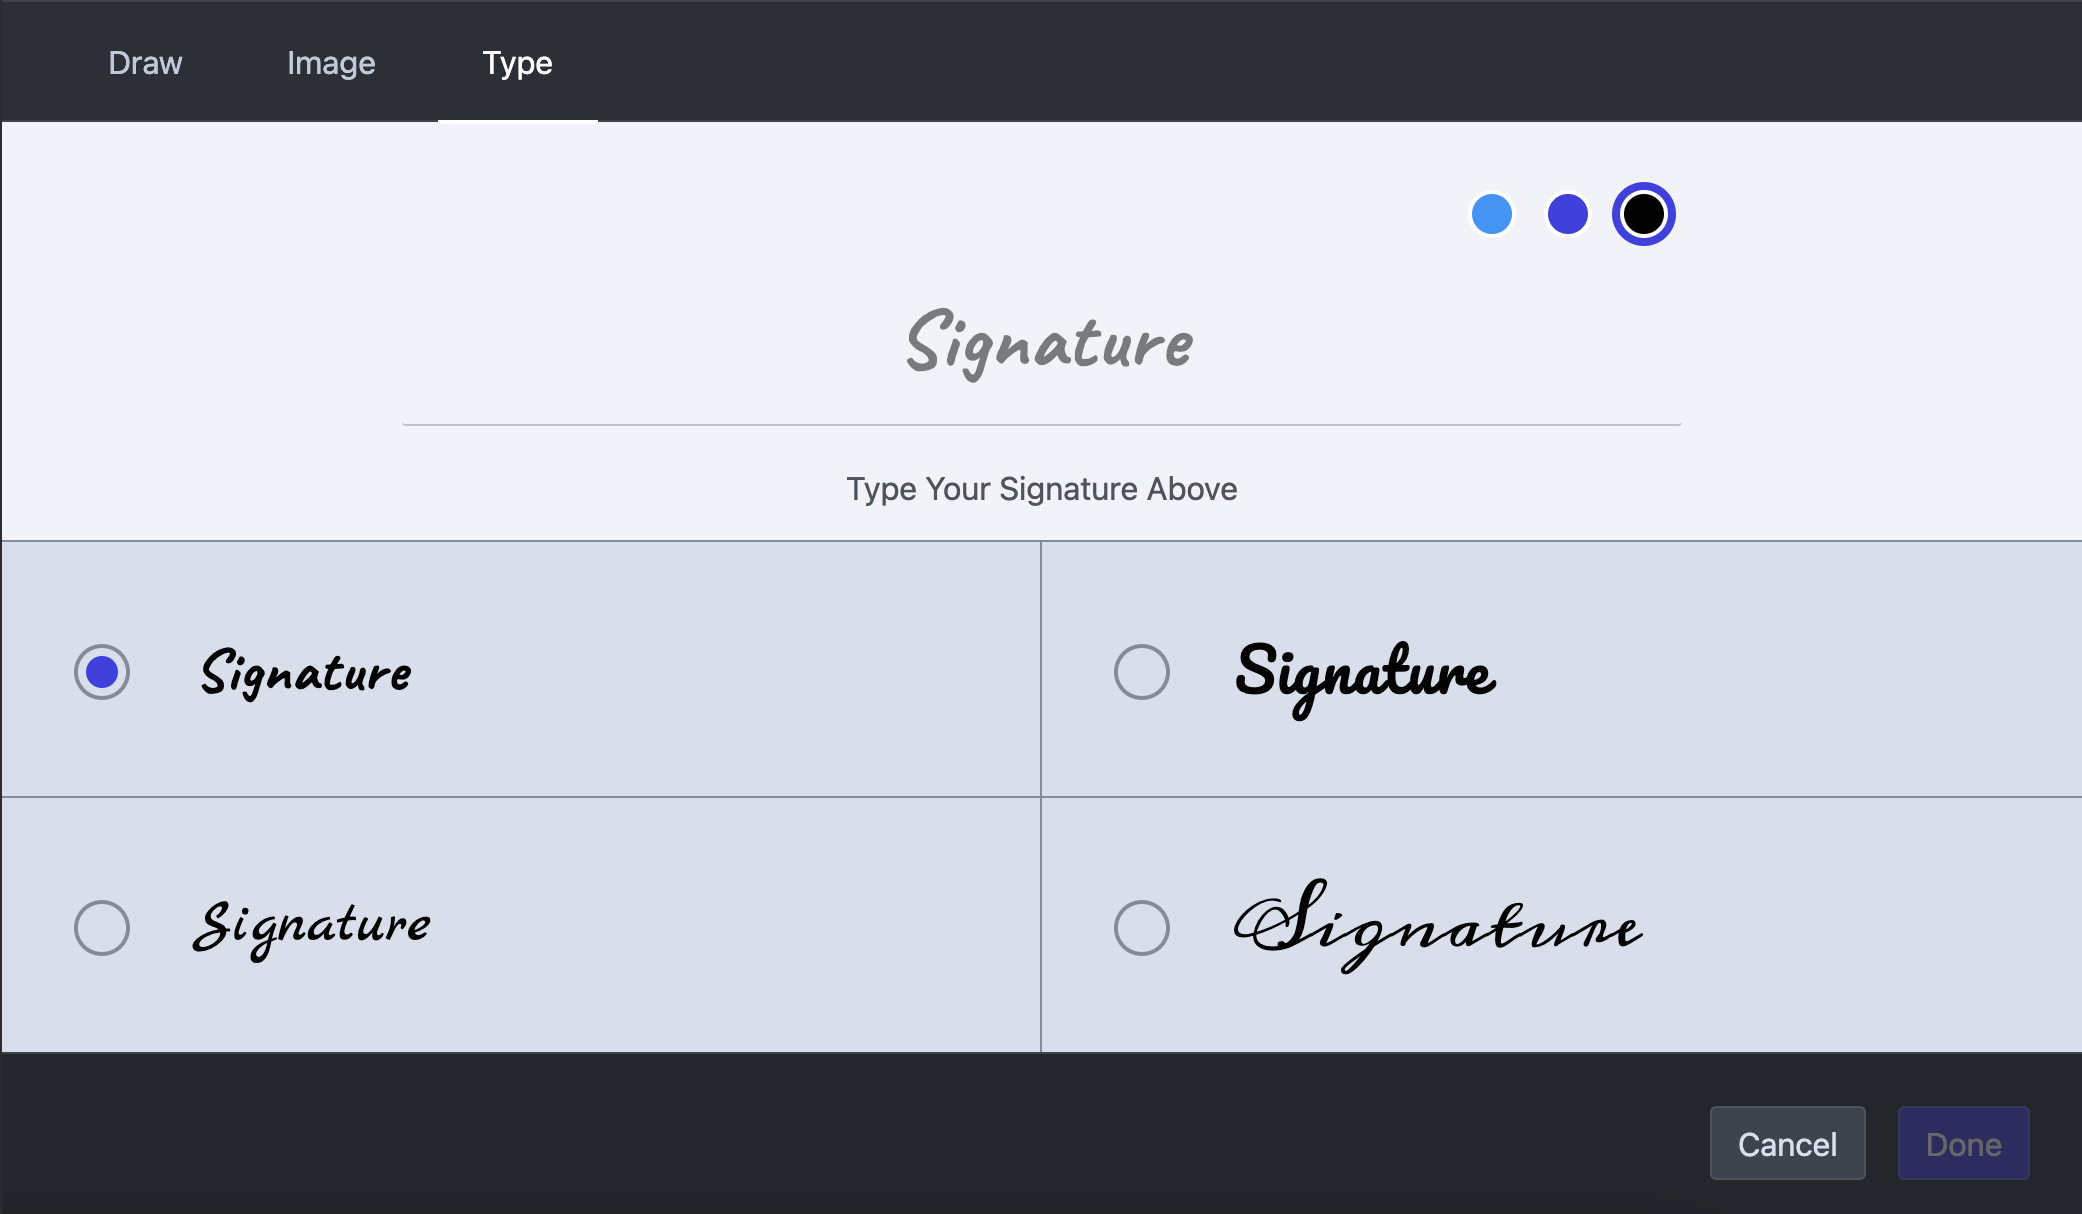 The type panel in the signature interface